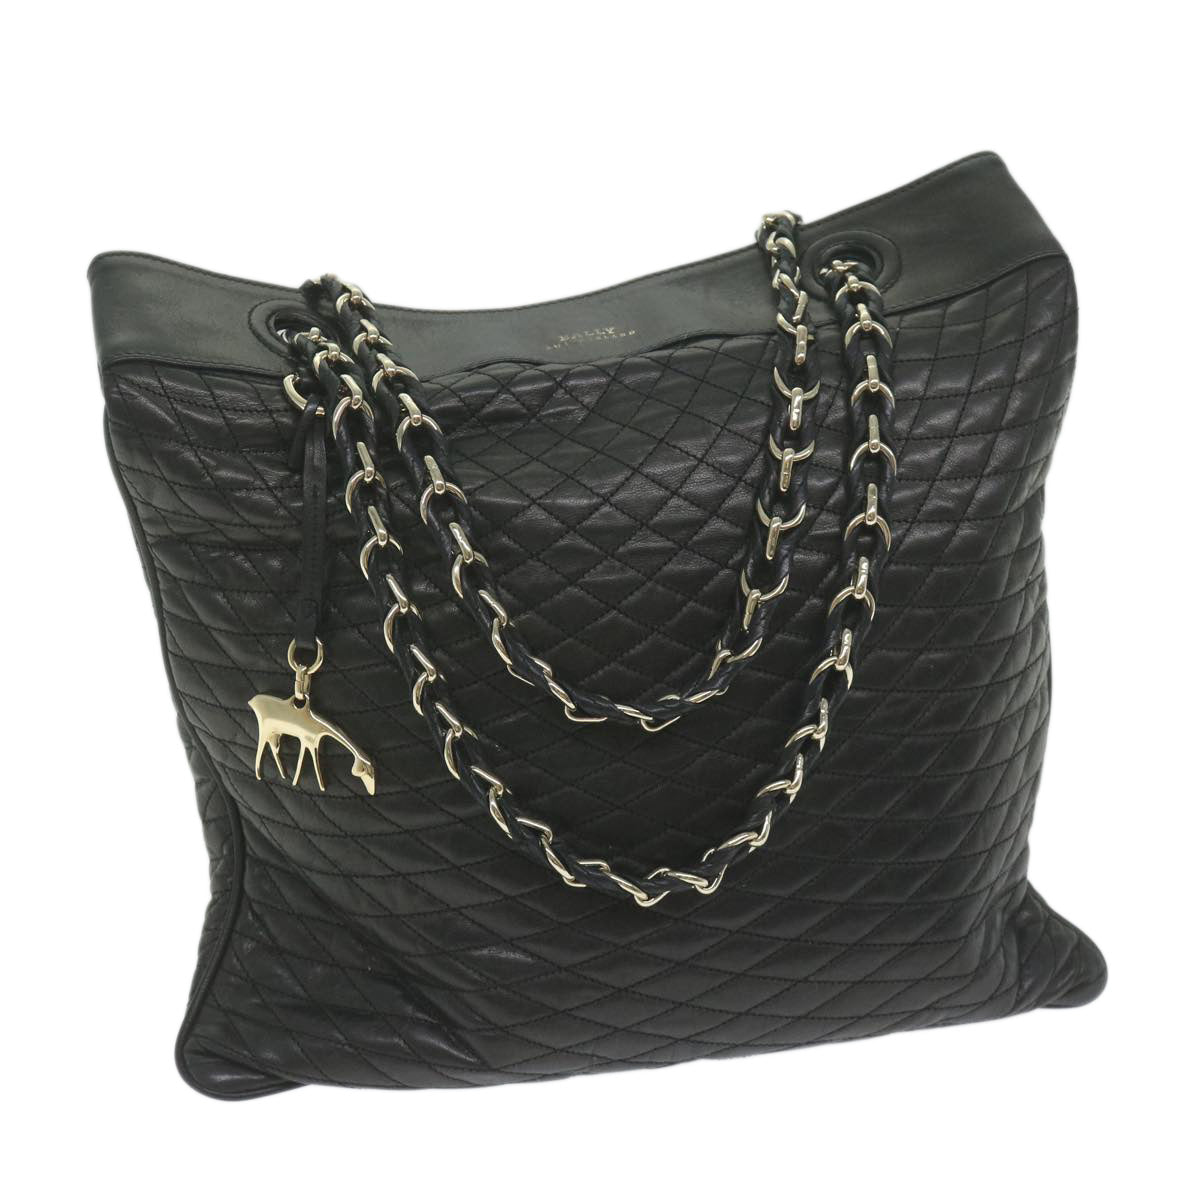 Quilted Chain Shoulder Bag Leather Black Auth Ac2555